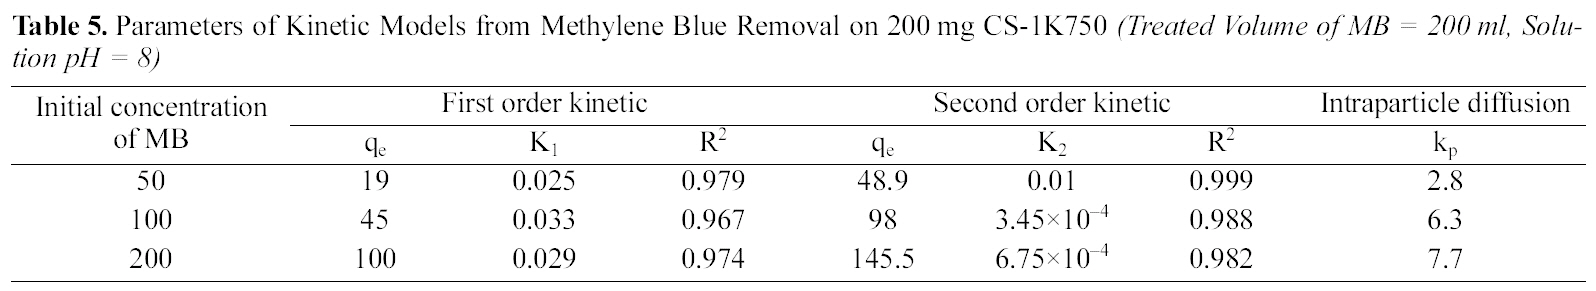 Parameters of Kinetic Models from Methylene Blue Removal on 200 mg CS-1K750 (Treated Volume of MB = 200 ml Solution pH = 8)